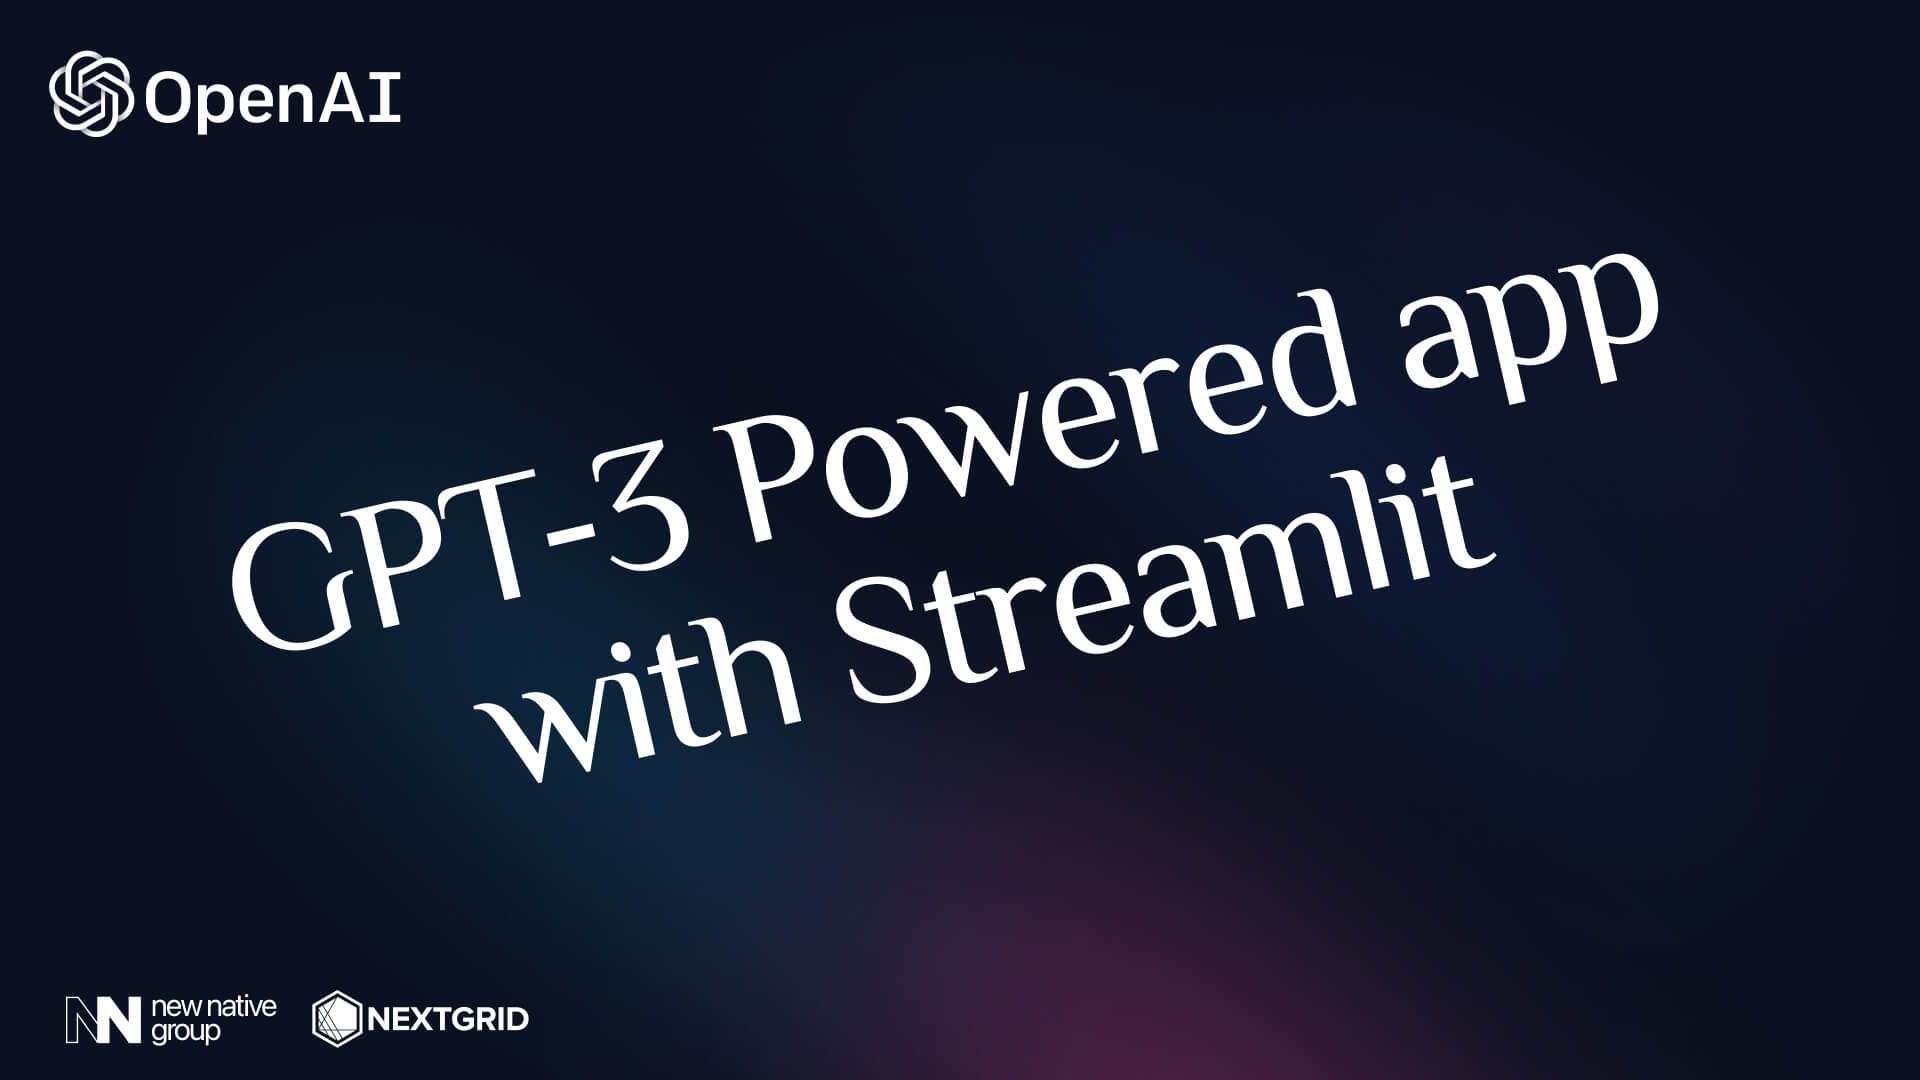 How to use GPT-3 tutorial: Build your own GPT-3 Powered application using streamlit